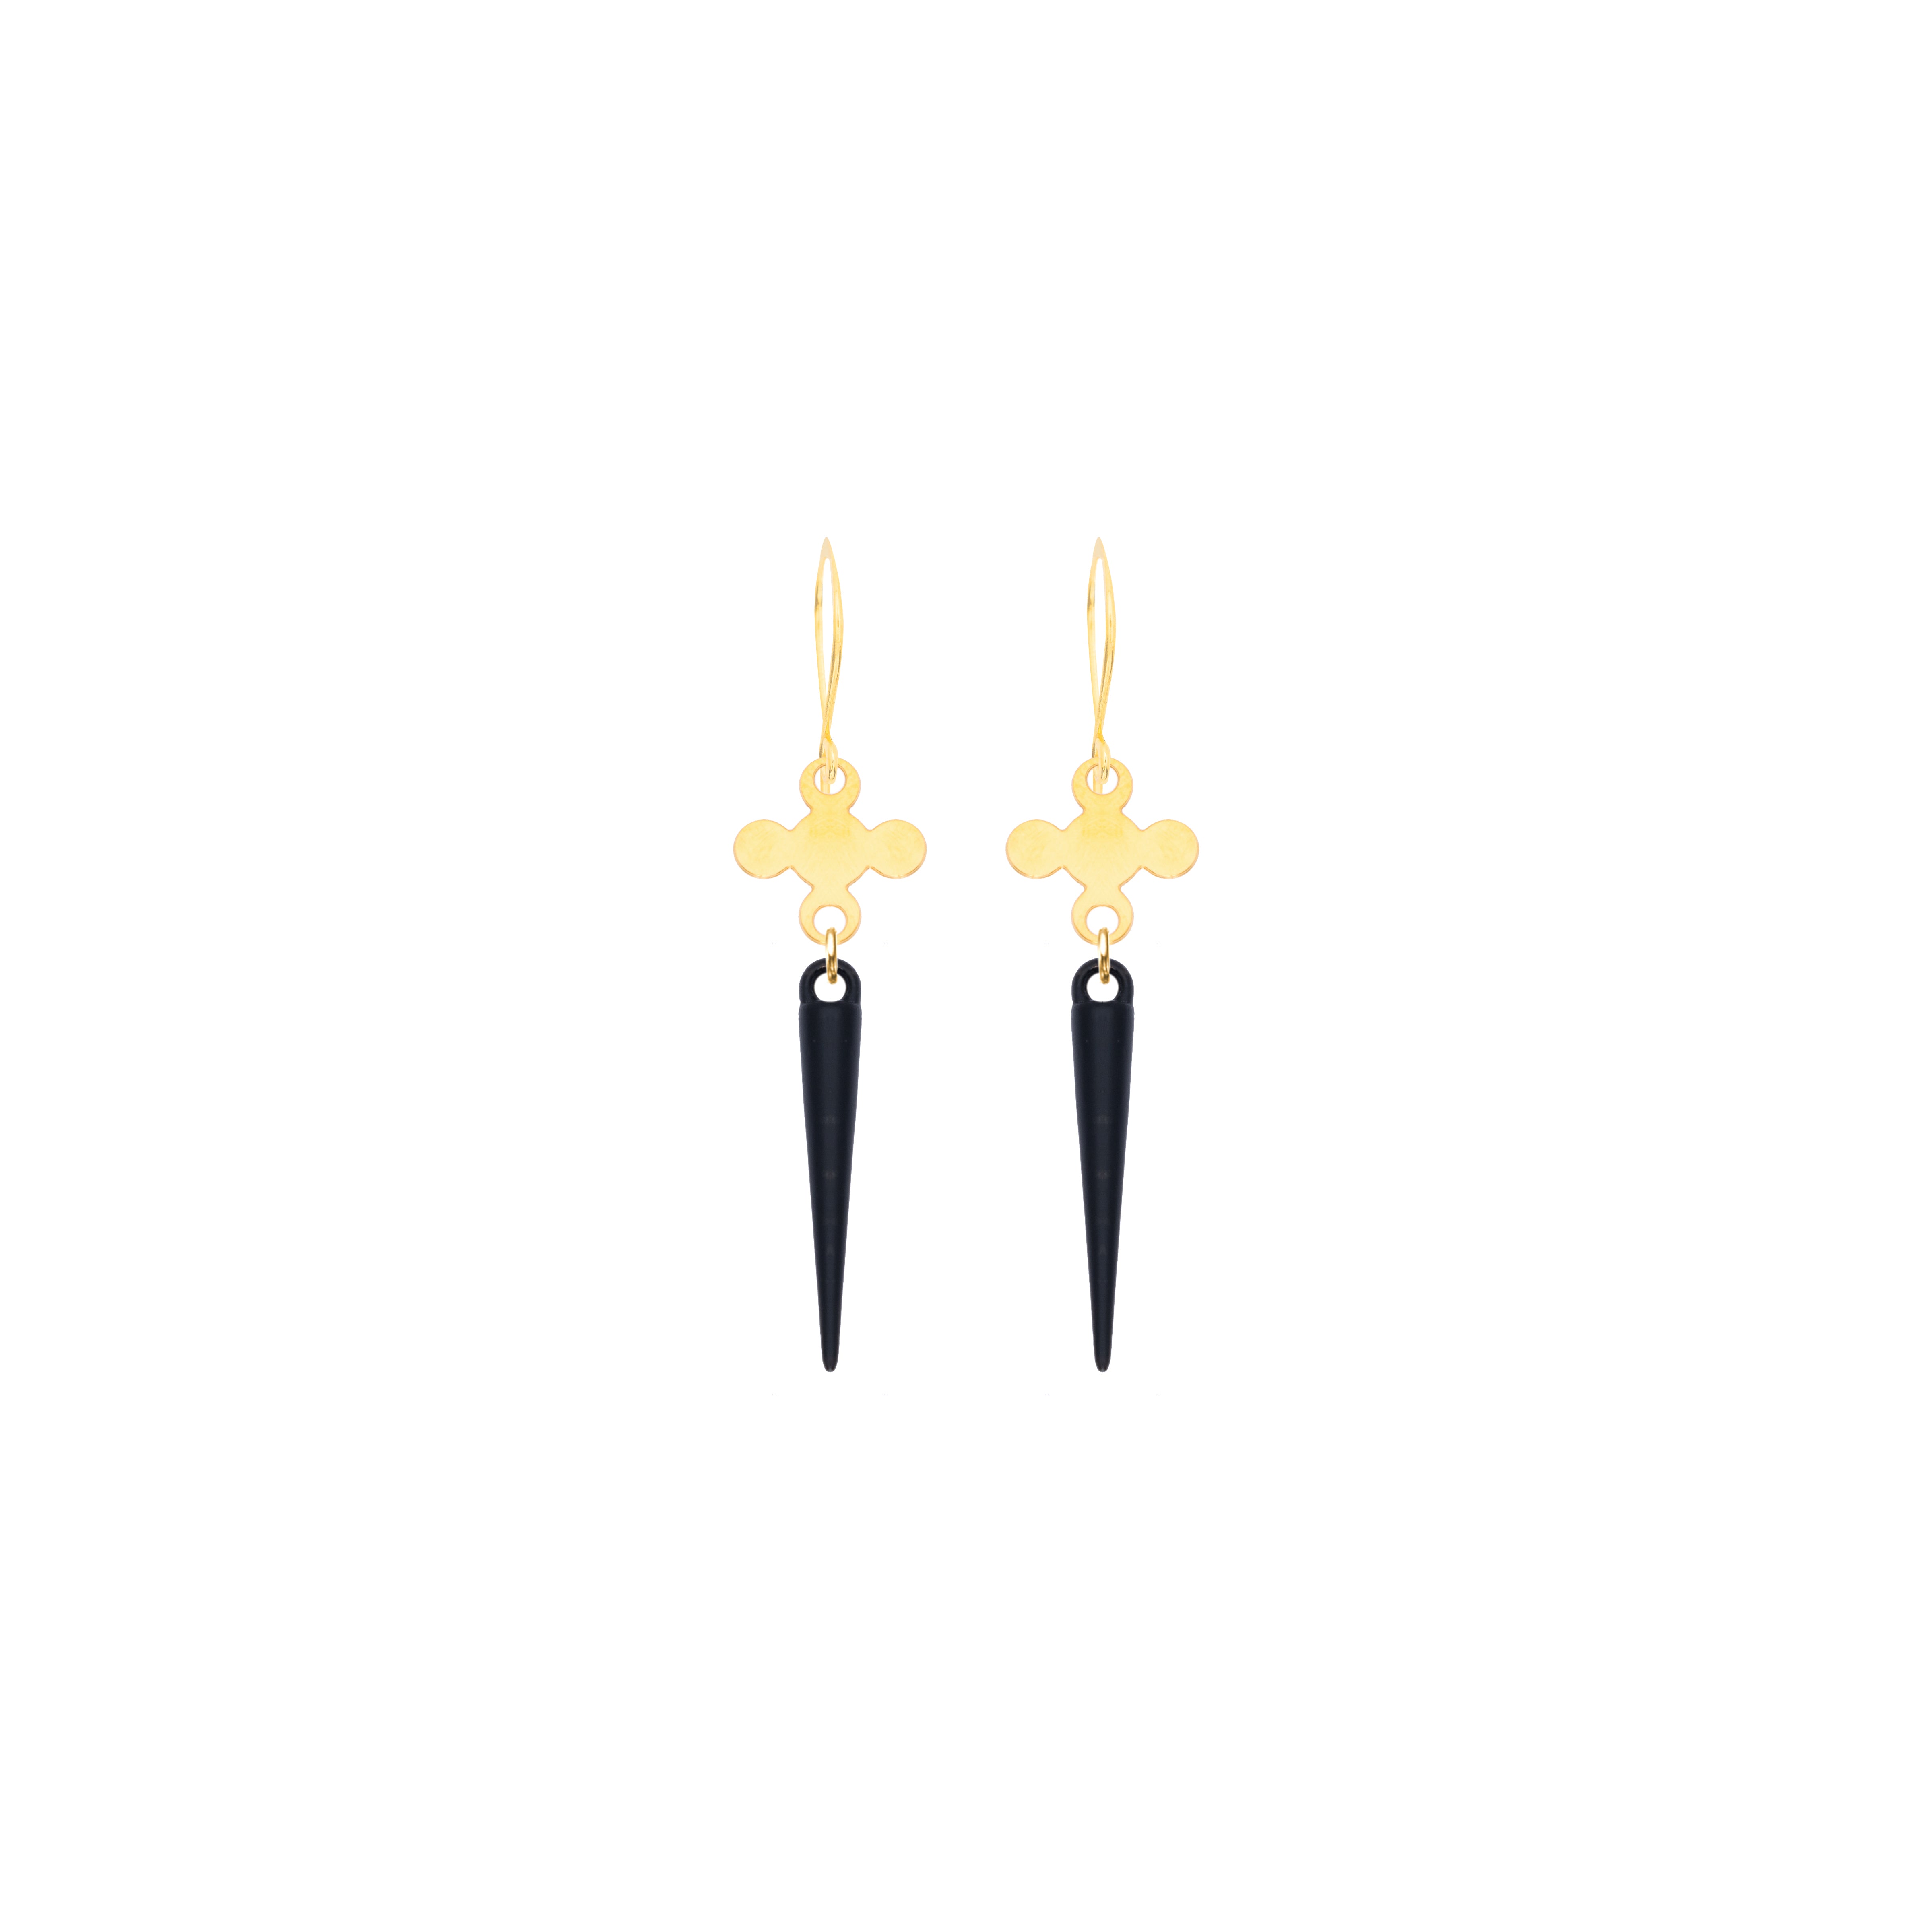 Mens earrings with spikes